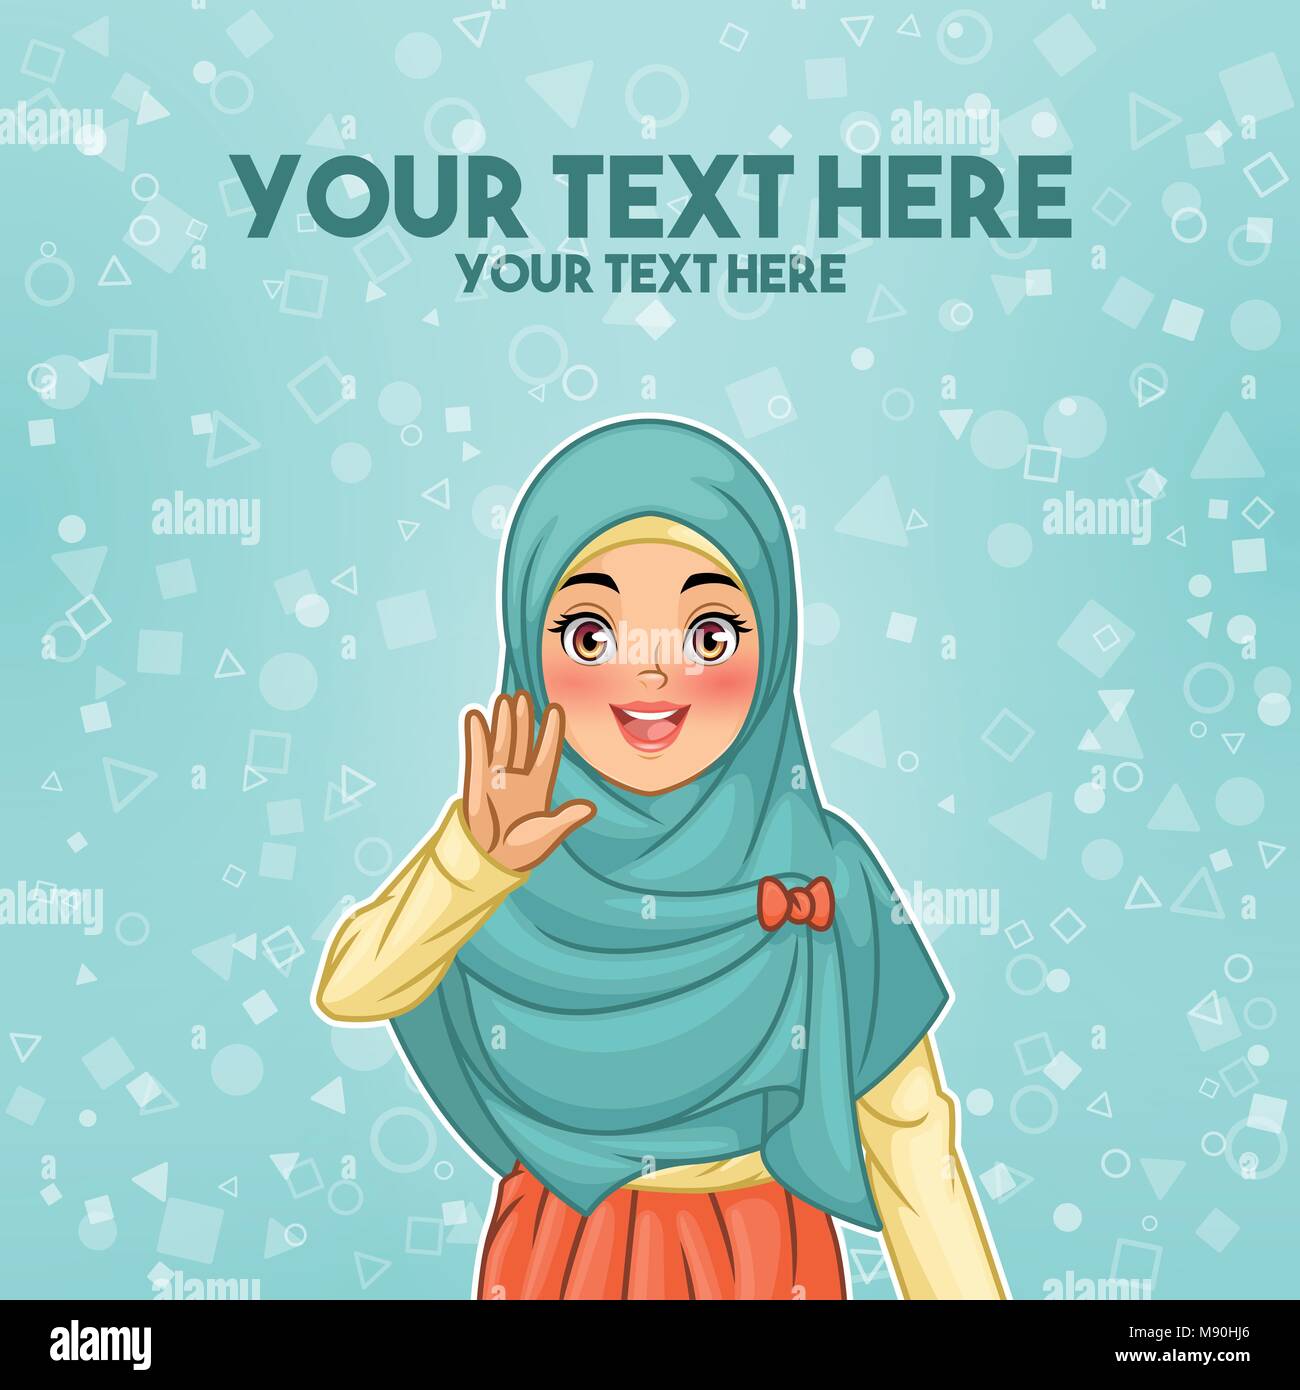 Young muslim woman wearing hijab veil waving with her palm or five fingers gesture, cartoon character design, against tosca background. Stock Vector